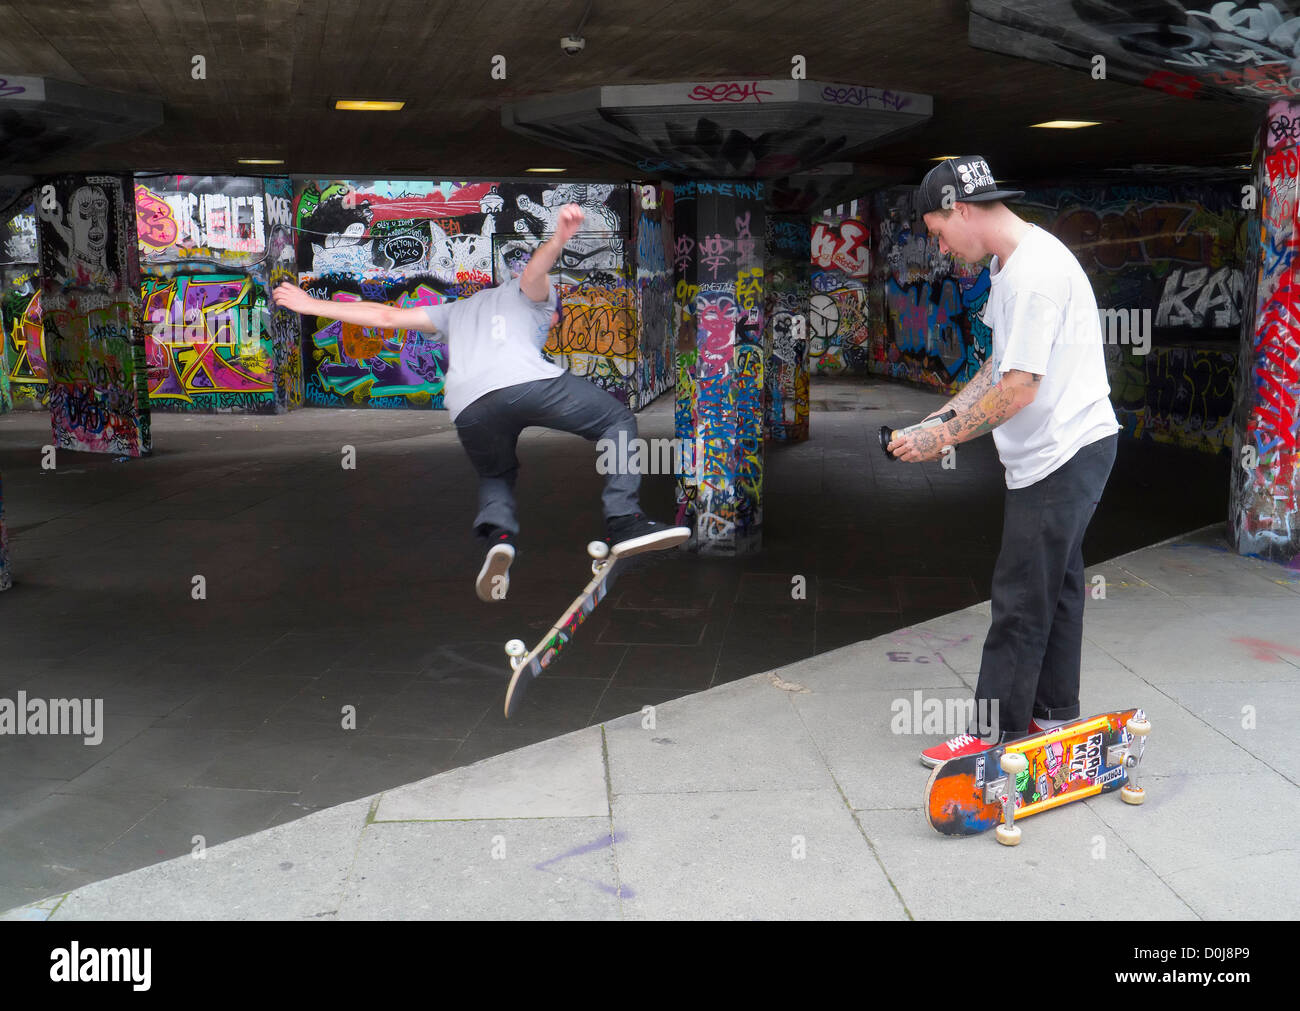 Videoing skateboarders at graffiti-land on the South Bank in London. Stock Photo